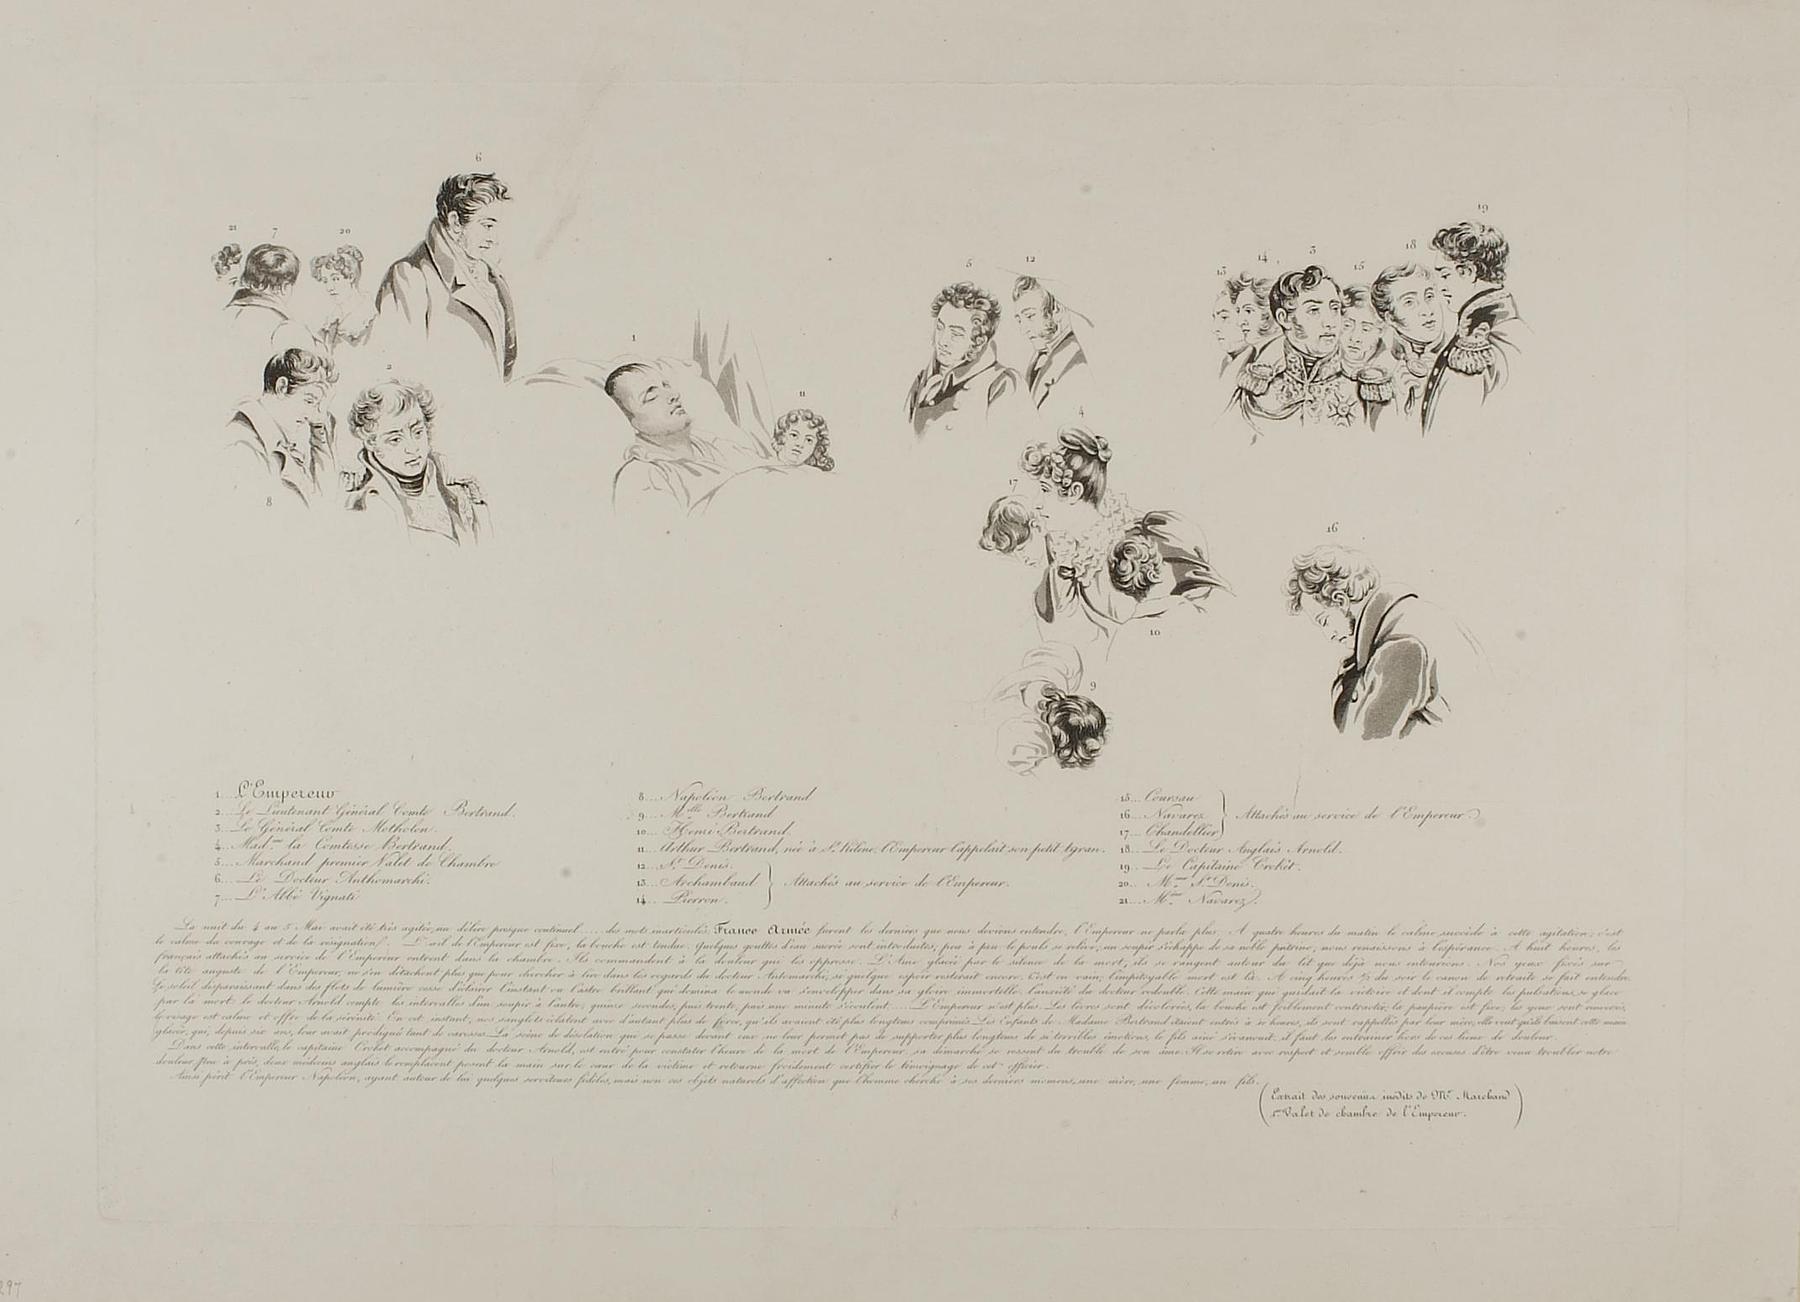 Death of Napoleon, Outline of Persons, E633a